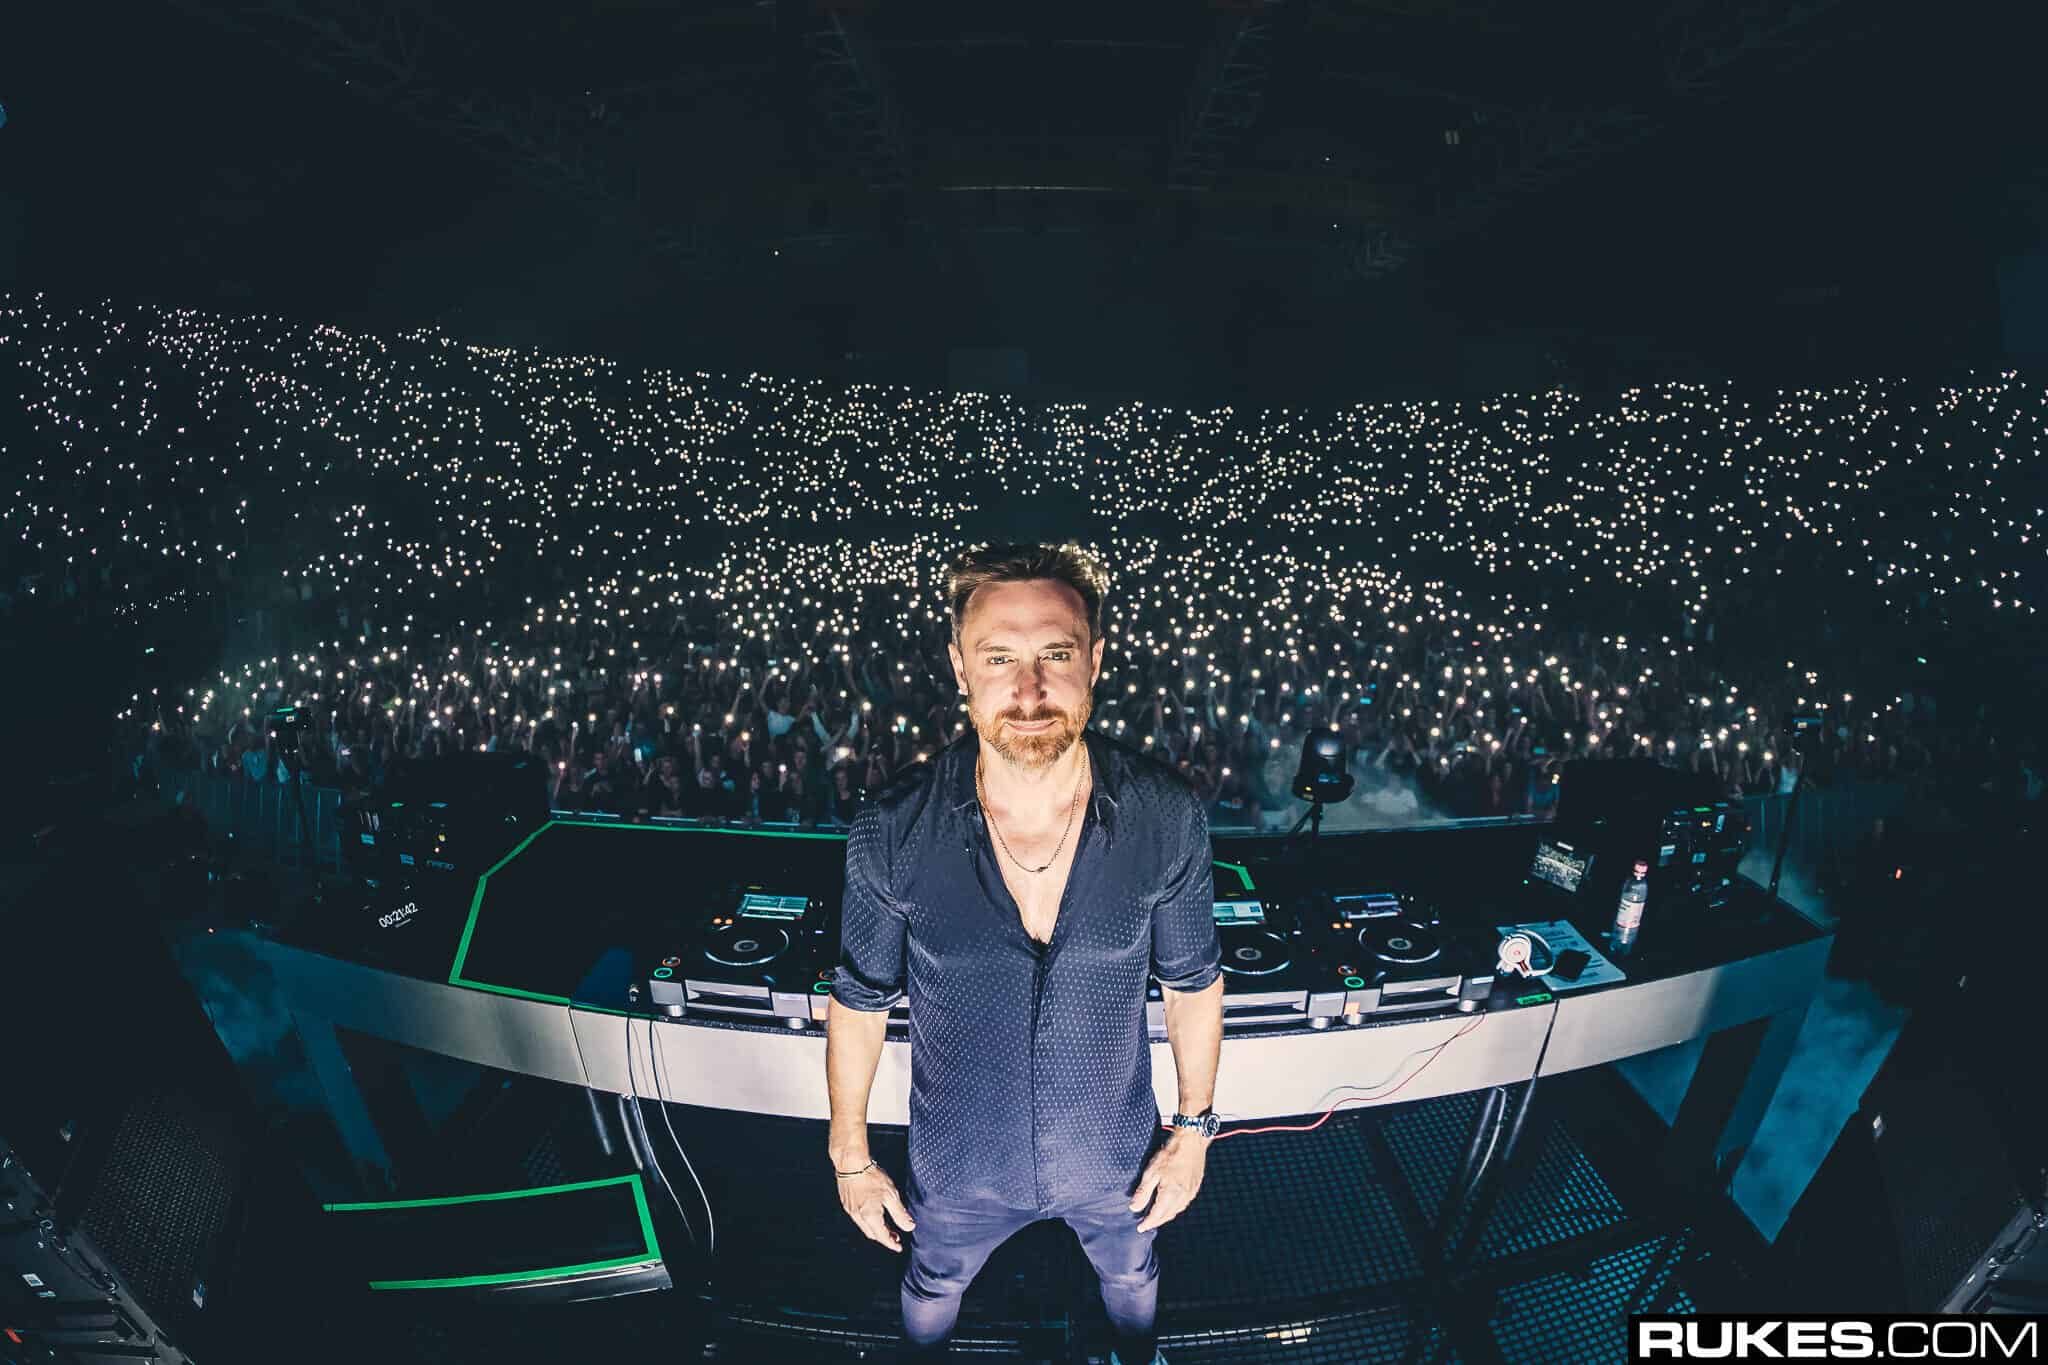 David Guetta unites with Dyro for disco-infused remix of LF SYSTEM’s ‘Afraid To Feel’: Listen